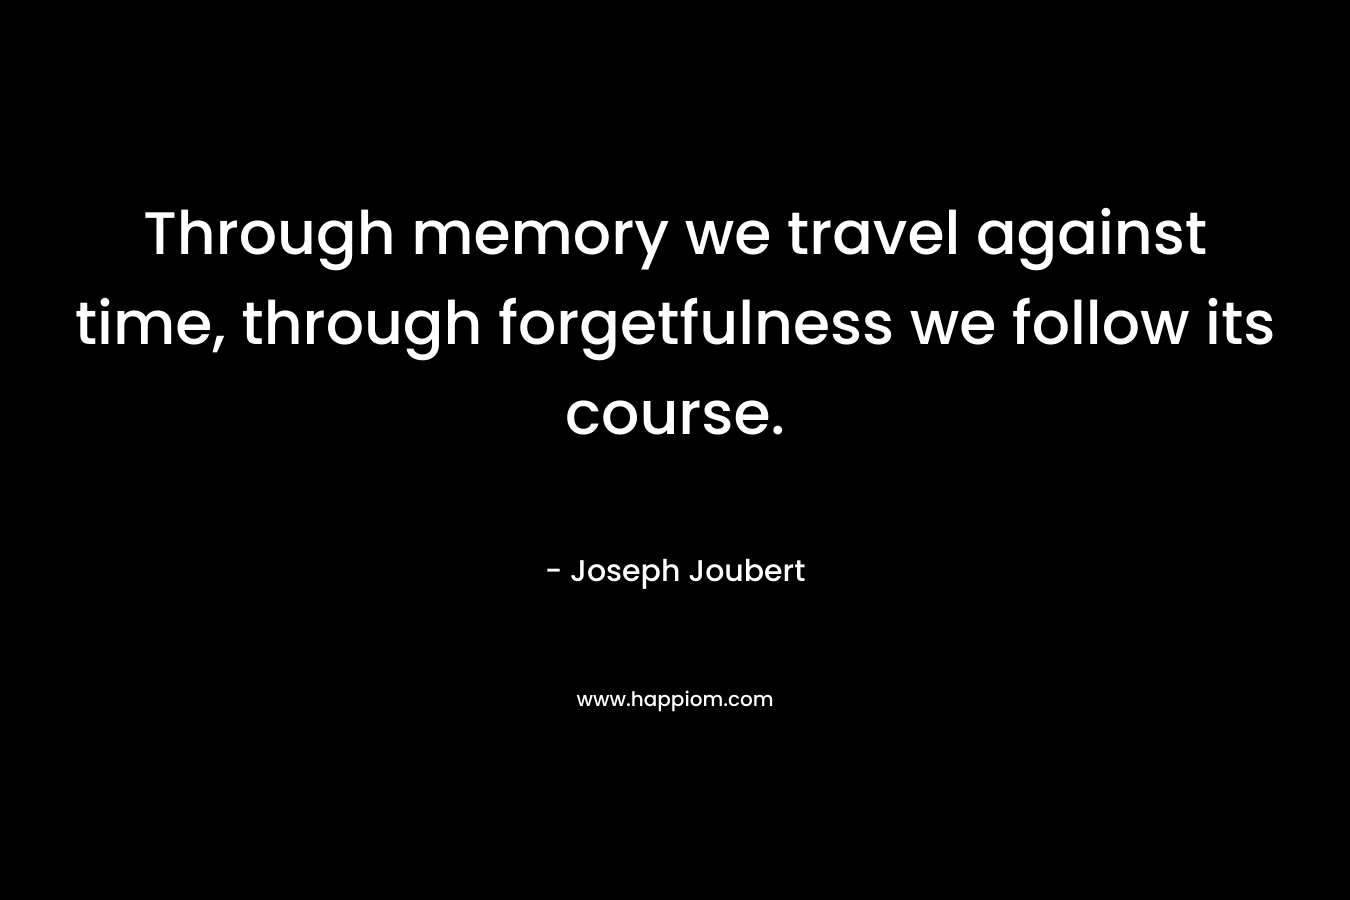 Through memory we travel against time, through forgetfulness we follow its course.